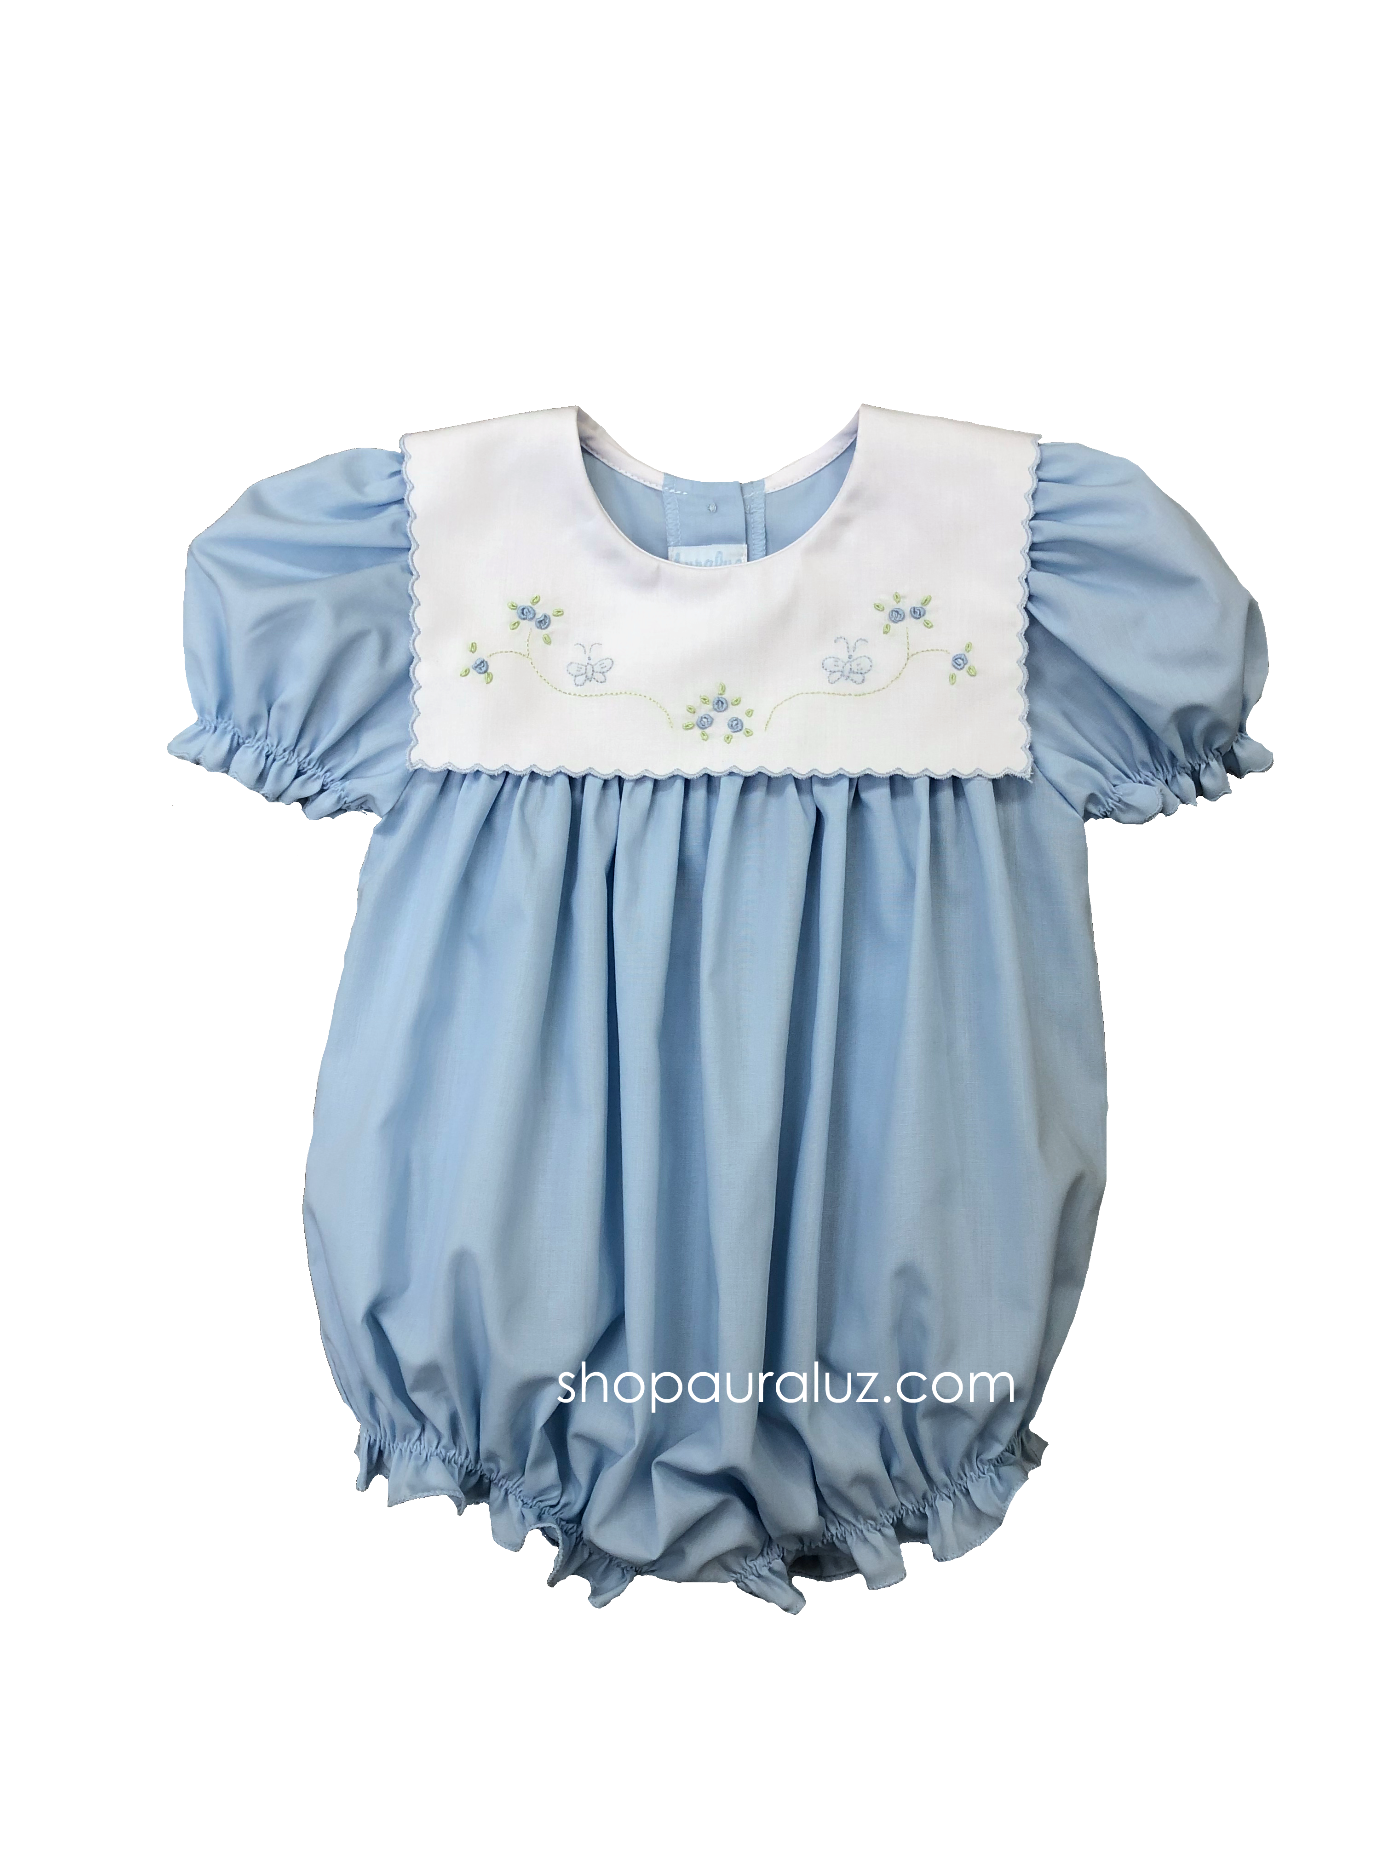 Auraluz Girl Bubble...Blue with white square collar and embroidered flowers and butterflies